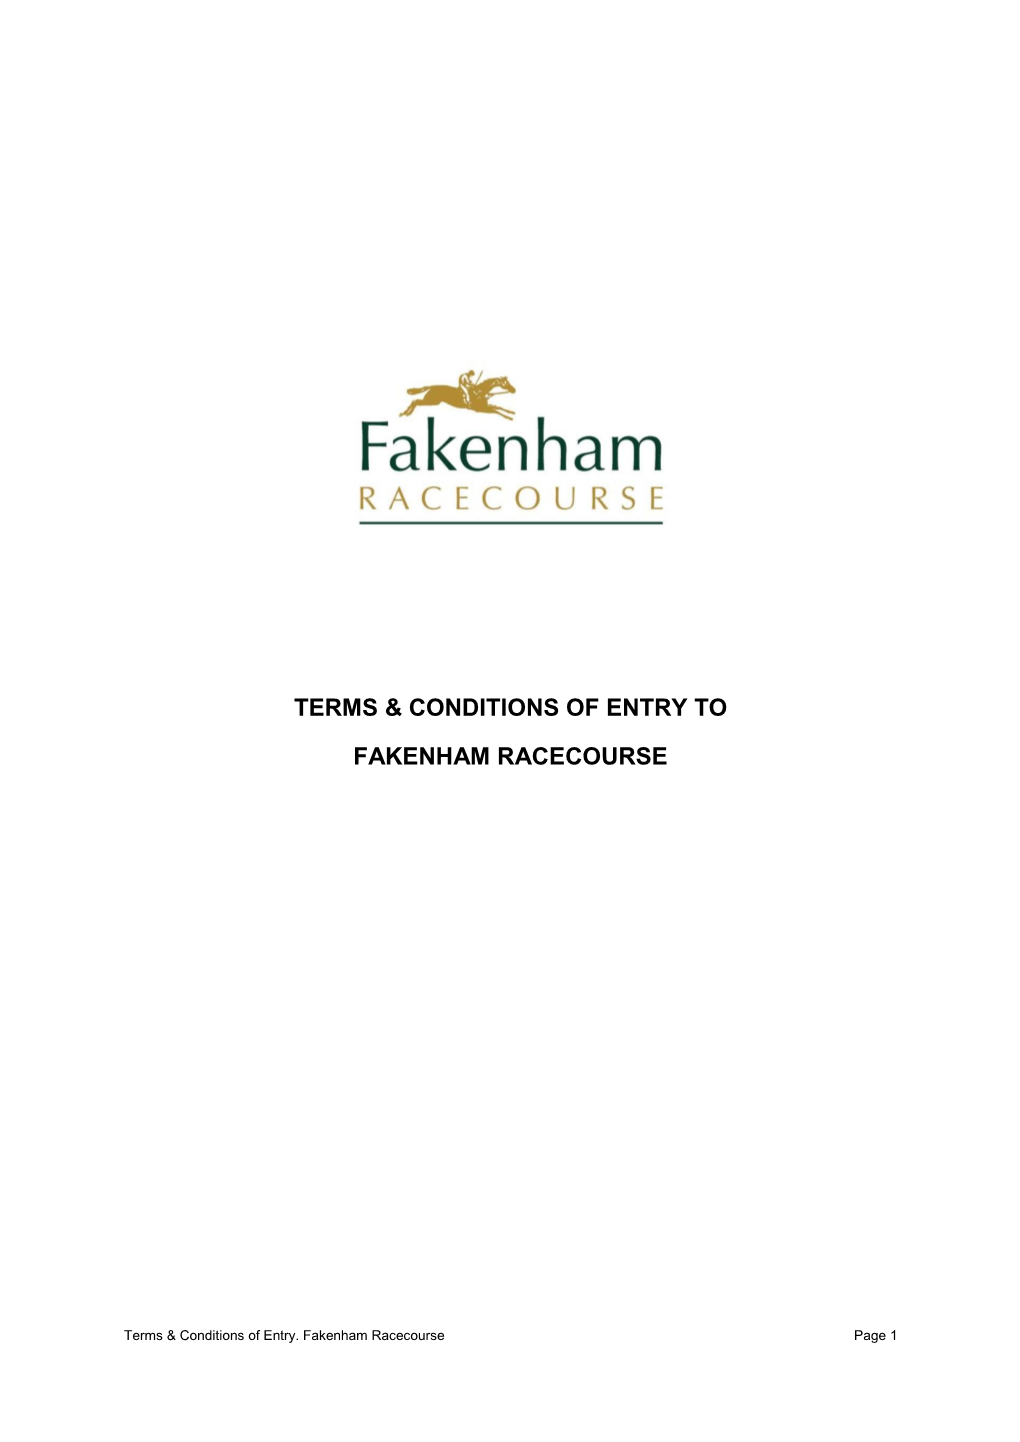 Terms & Conditions of Entry to Fakenham Racecourse